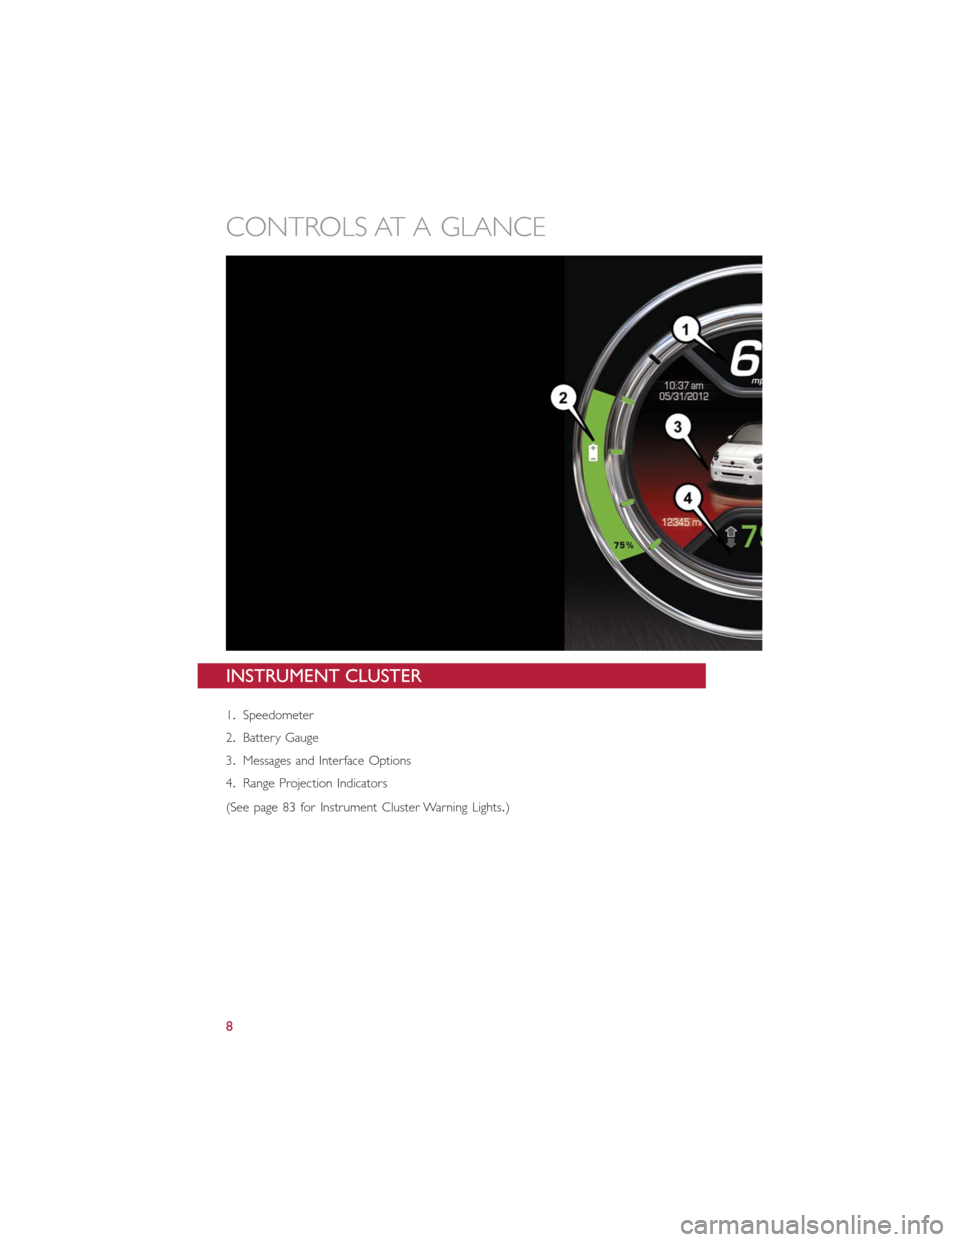 FIAT 500E 2016 2.G User Guide INSTRUMENT CLUSTER
1.Speedometer
2.Battery Gauge
3.Messages and Interface Options
4.Range Projection Indicators
(See page 83 for Instrument Cluster Warning Lights.)
CONTROLS AT A GLANCE
8 